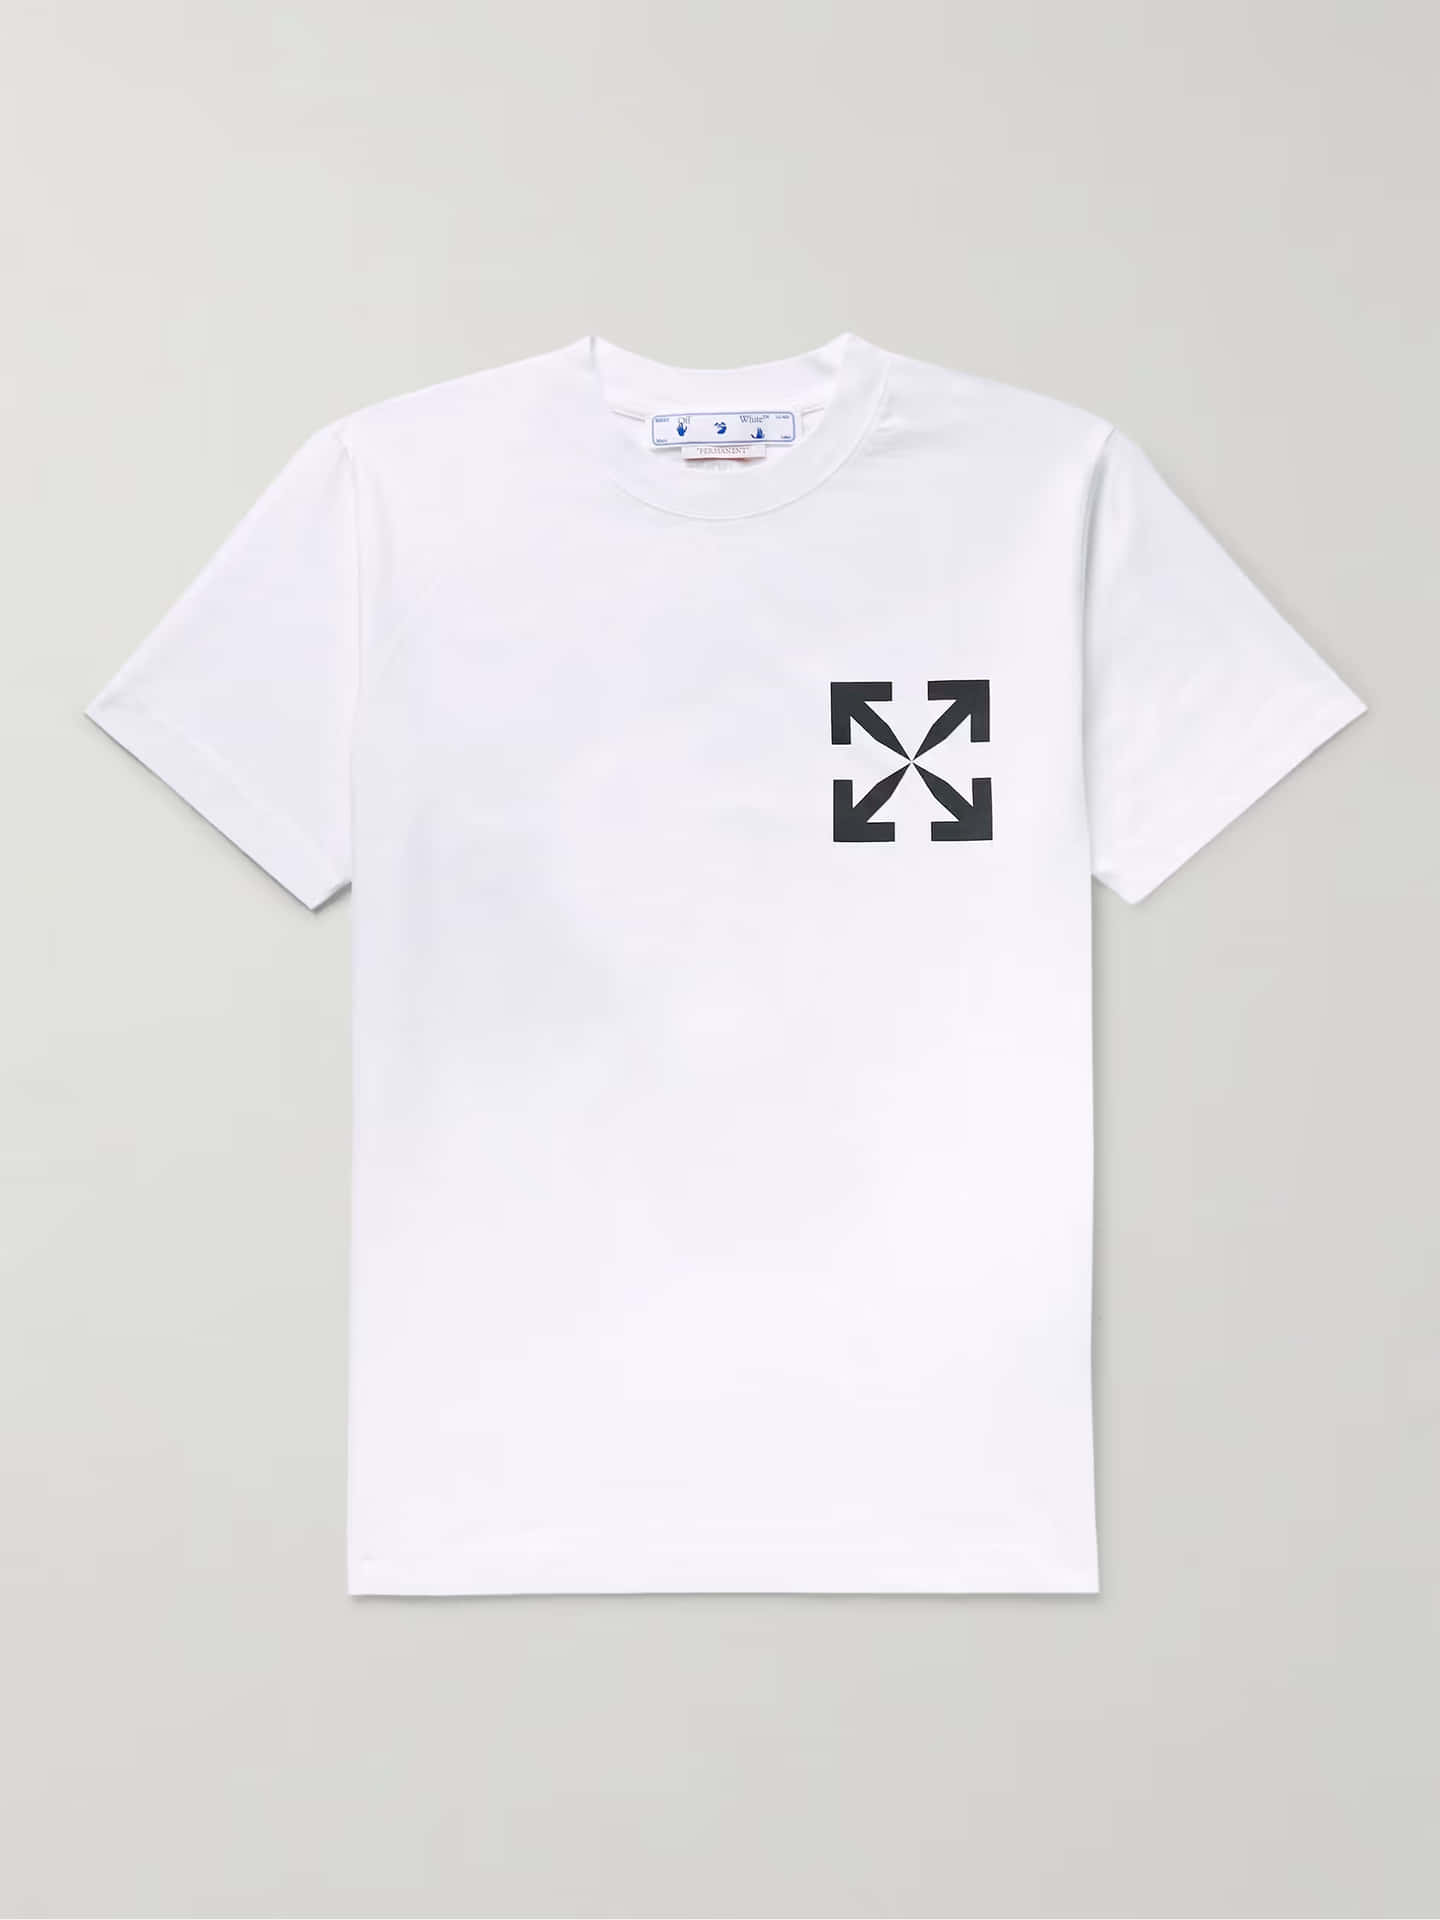 Download Off-white Arrow Cotton T-shirt | Wallpapers.com